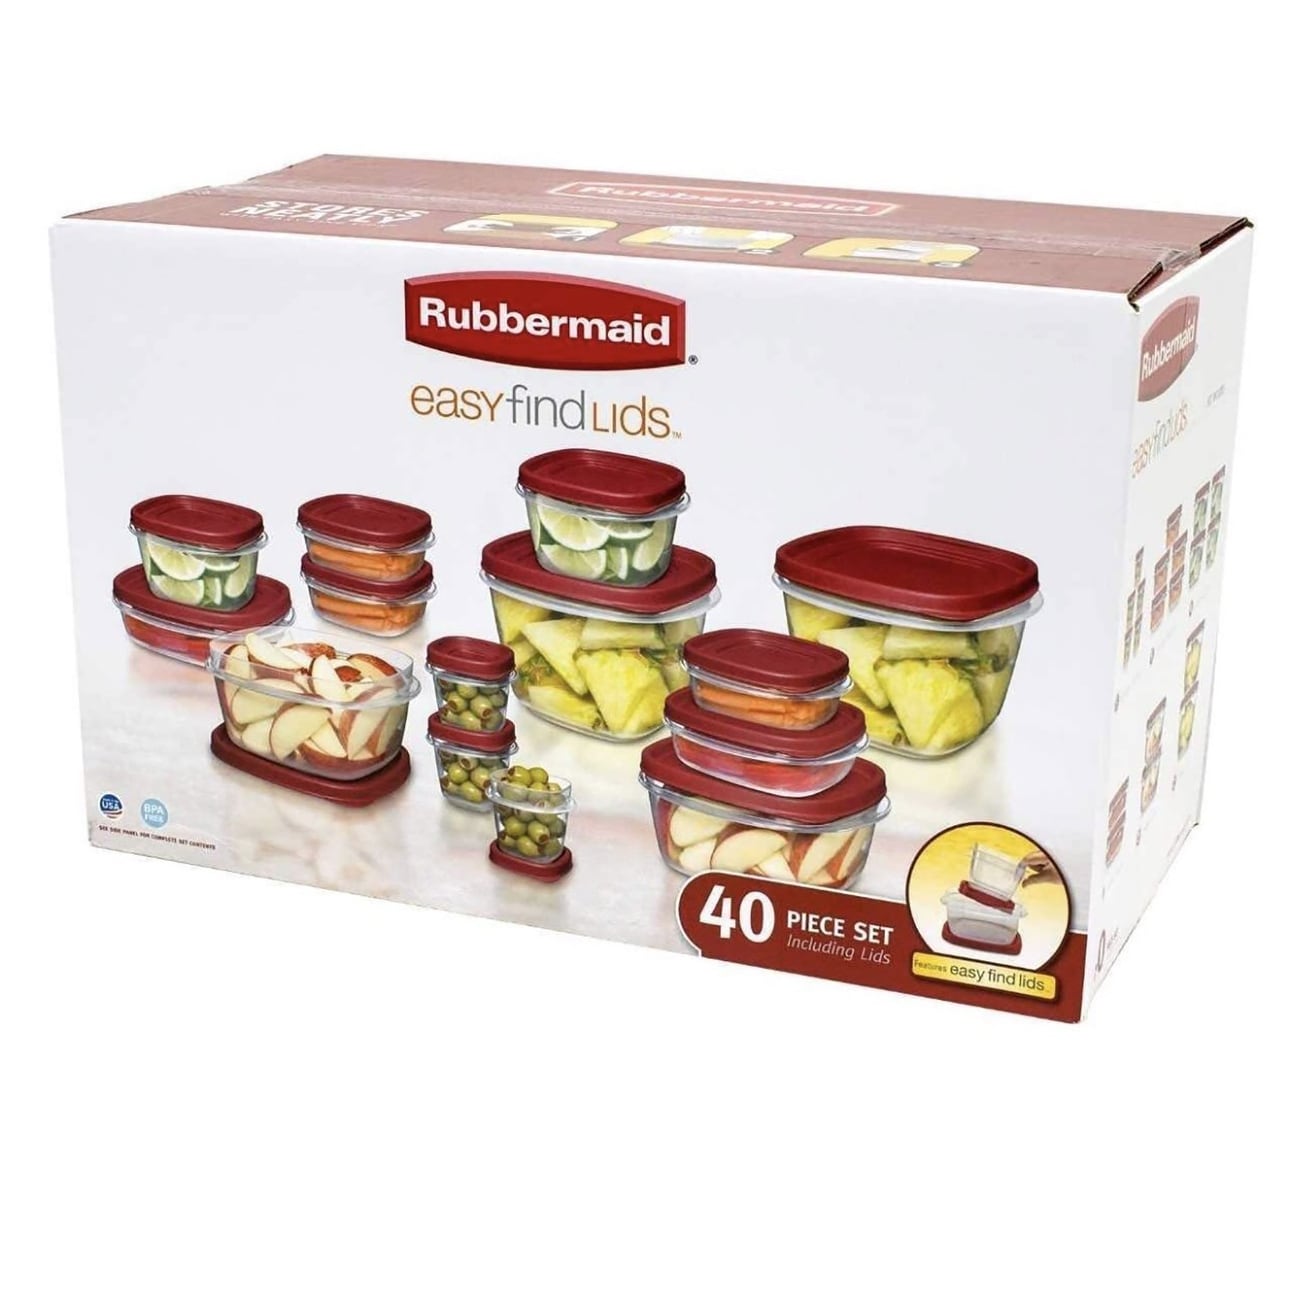 https://ak1.ostkcdn.com/images/products/is/images/direct/3d024c3d6d21dda35b58ff71d06446d0215ab34d/Rubbermaid-Easy-Find-Lids-40-Piece-Storage-Containers-Set%2C-Clear-Red.jpg